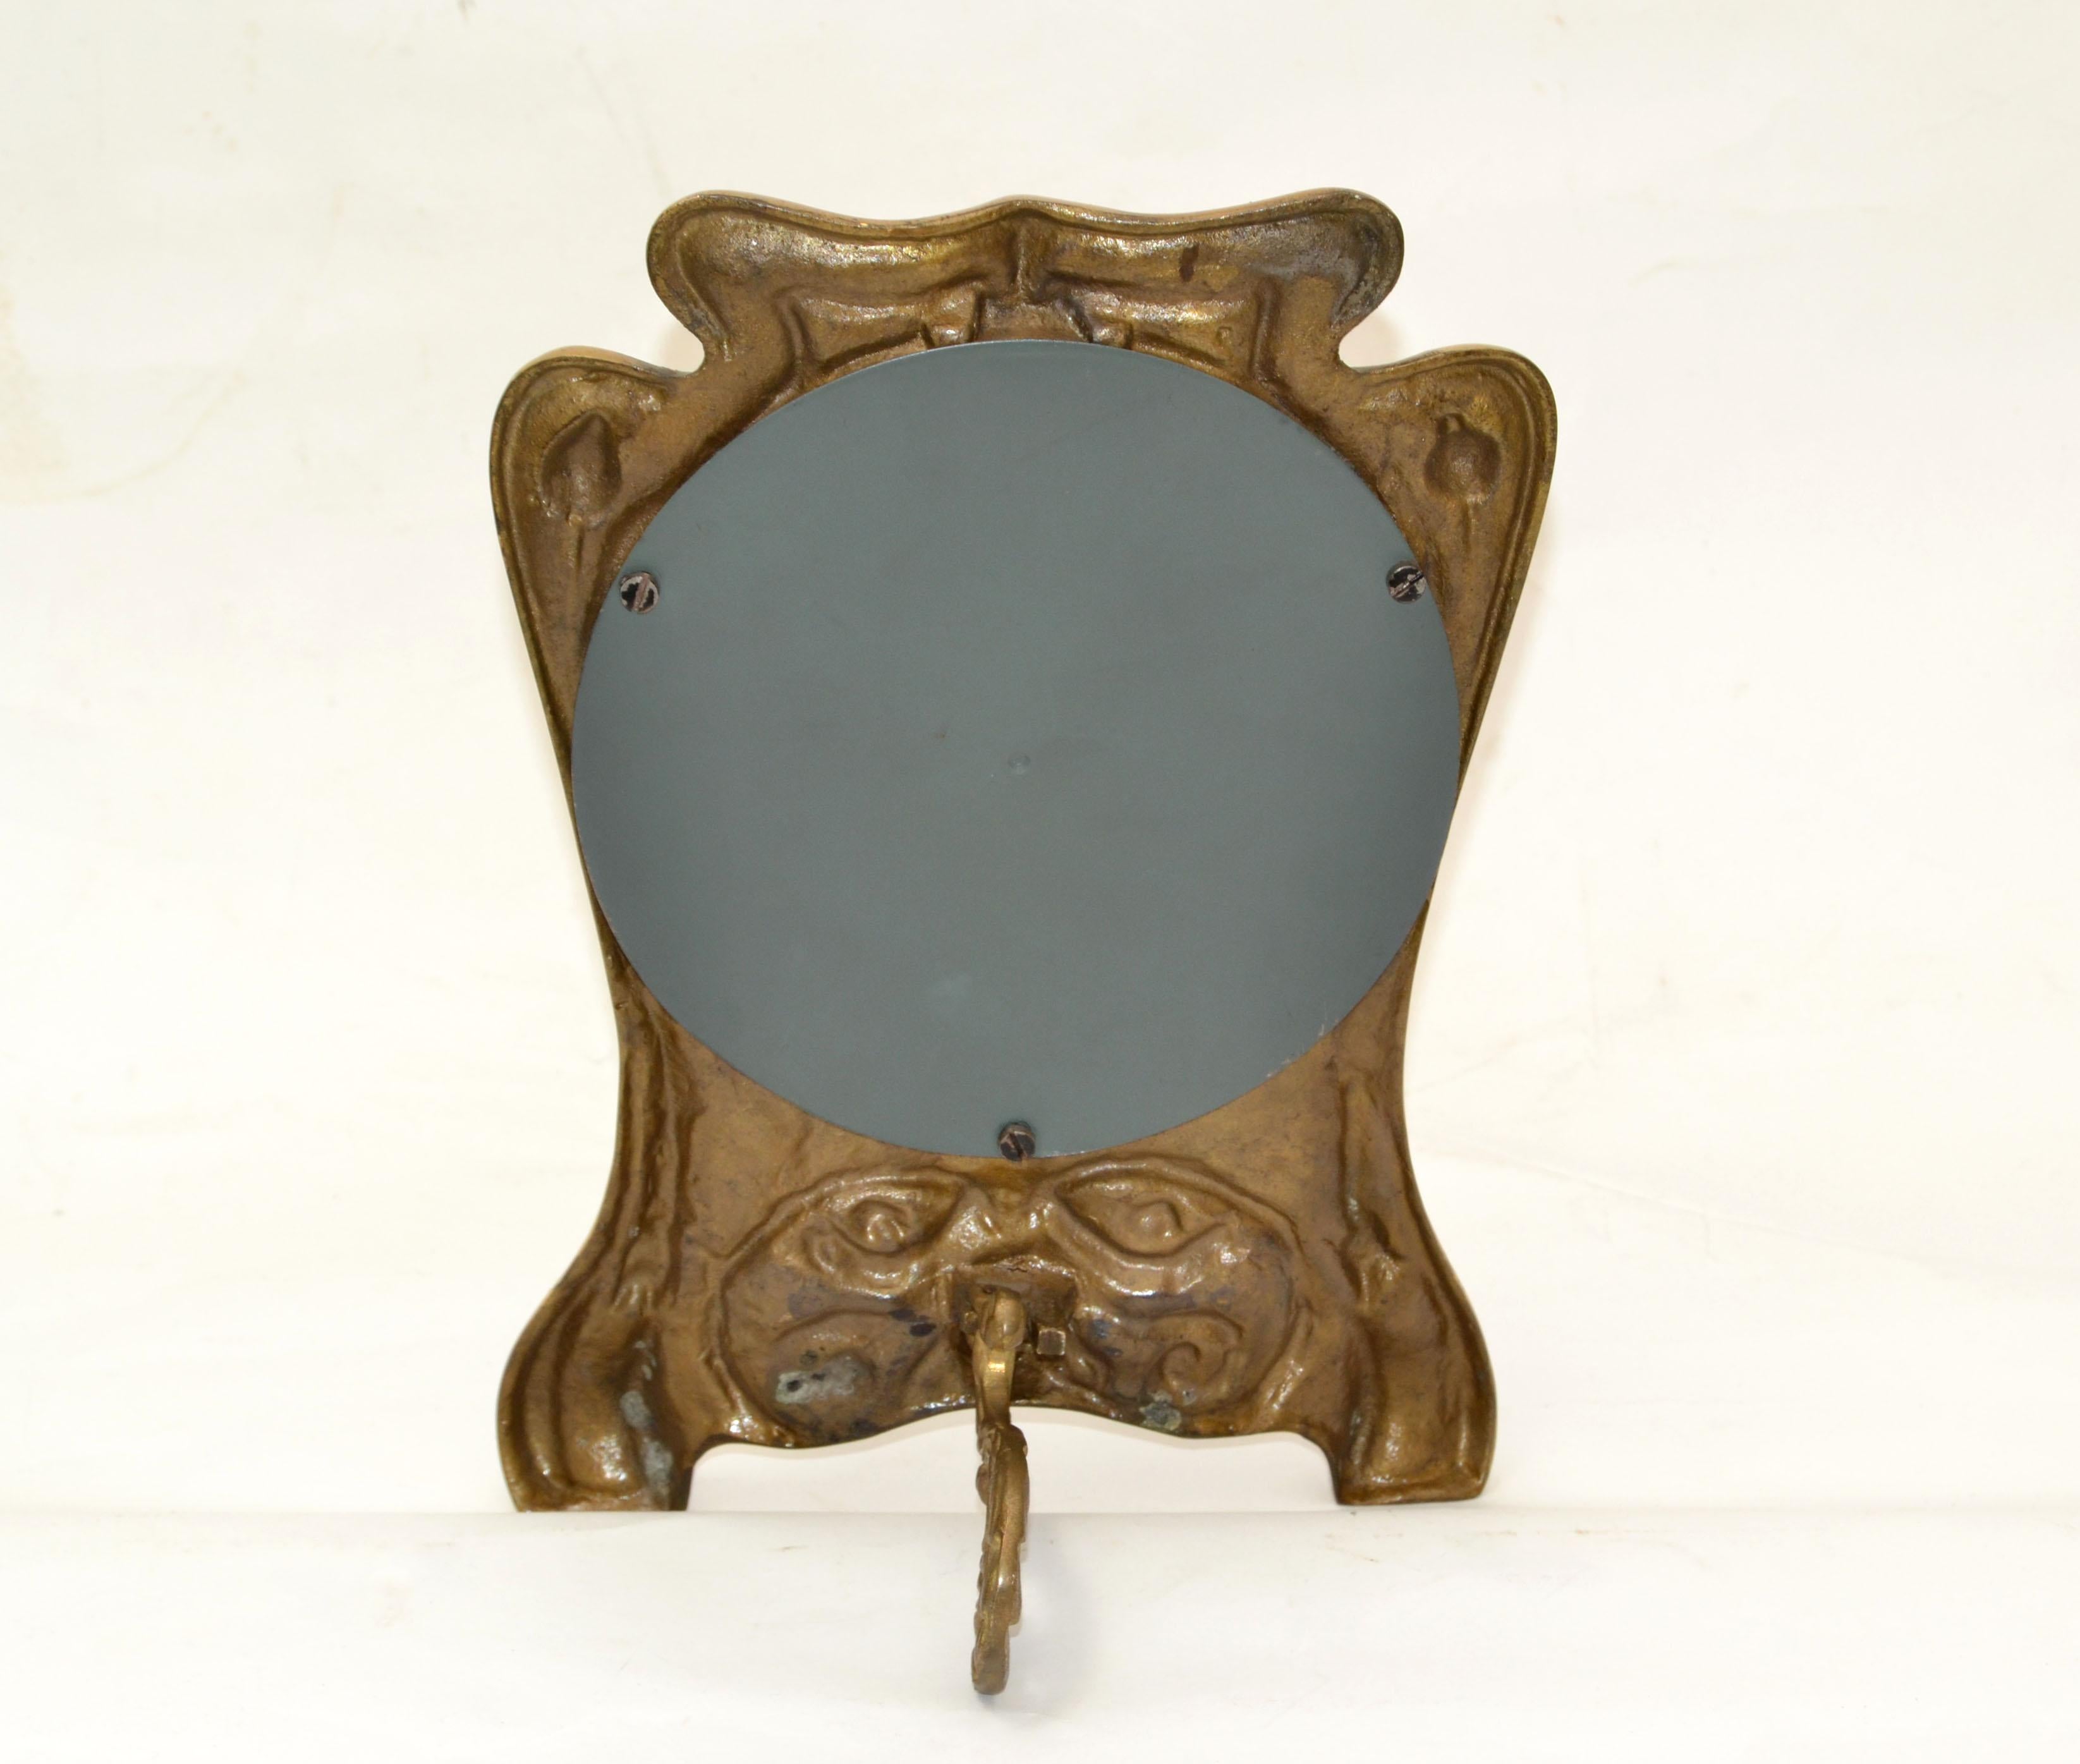 20th Century Art Nouveau Whimsical Handcrafted Golden Bronze Table Mirror Vanity Mirror 1940 For Sale